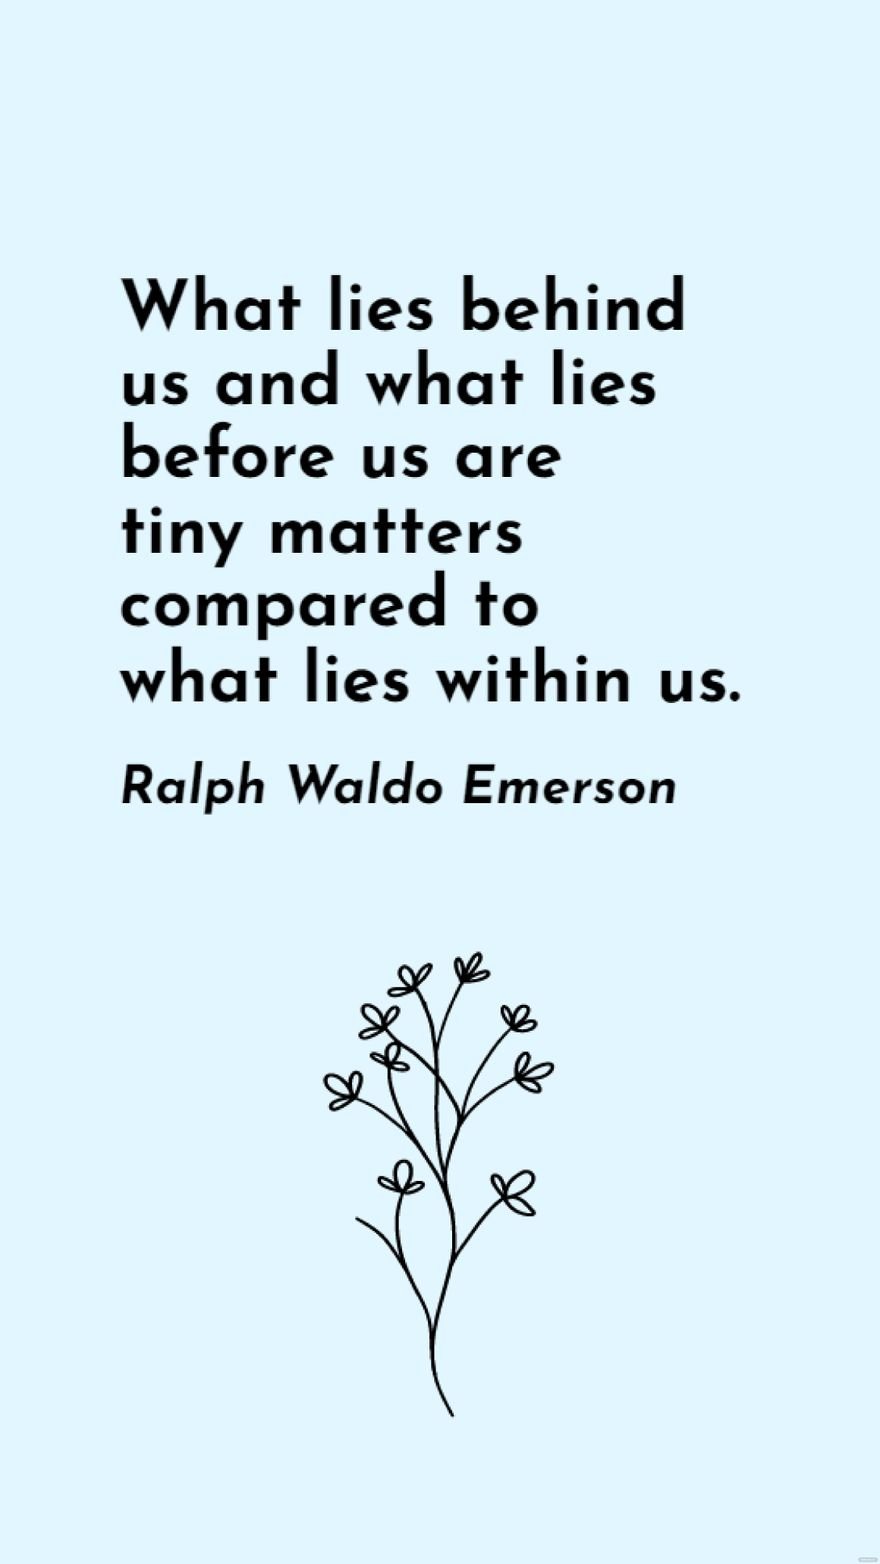 Ralph Waldo Emerson - What lies behind us and what lies before us are tiny matters compared to what lies within us. in JPG